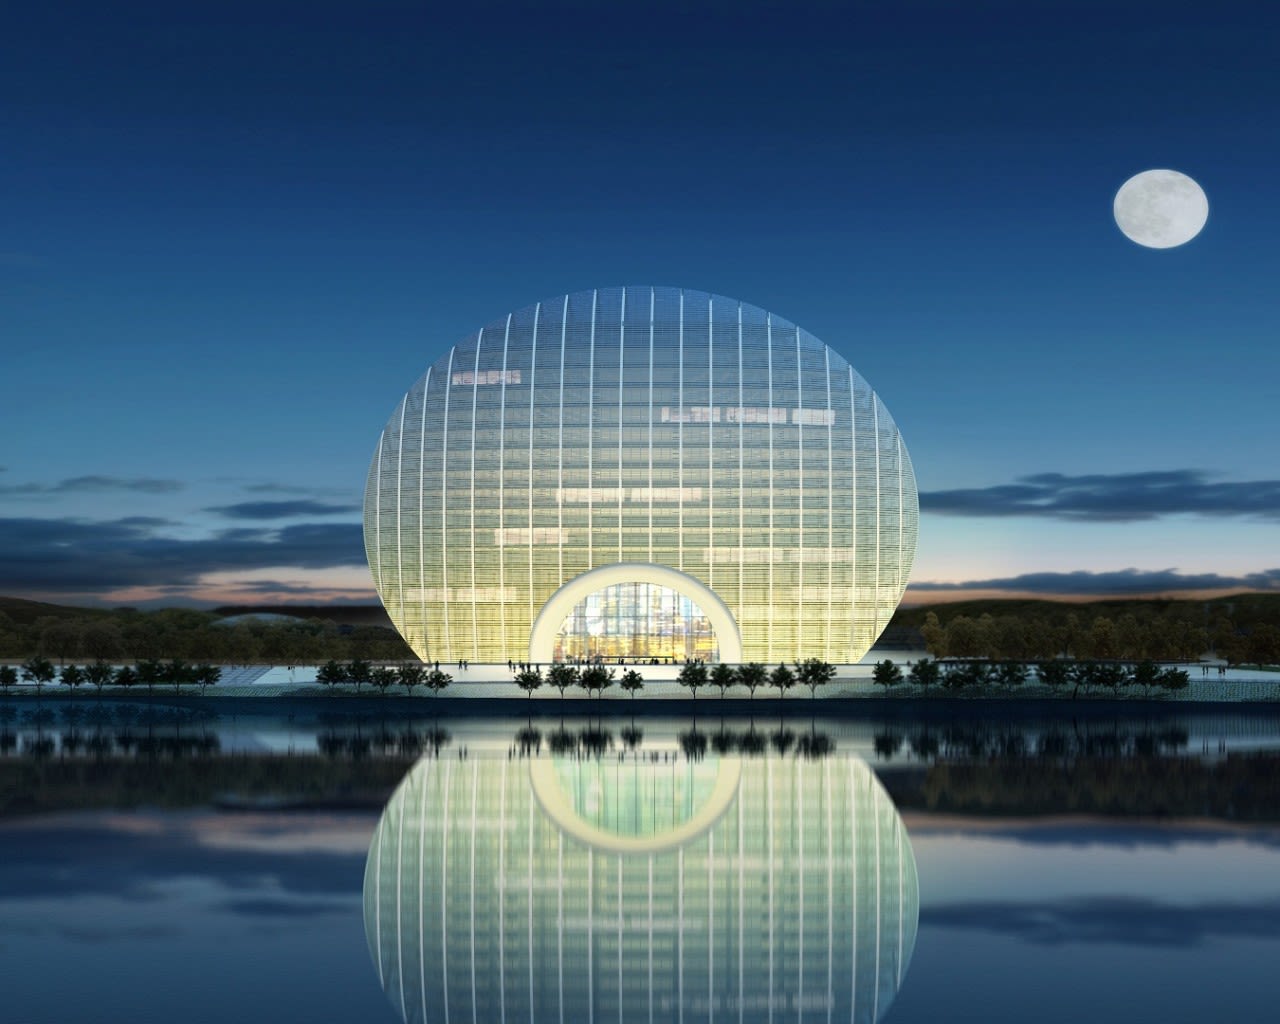 Covered with more than 10,000 glass panels lit by LEDs at night, Sunrise Kempinski's architecture had the world buzzing when it opened mid-November.